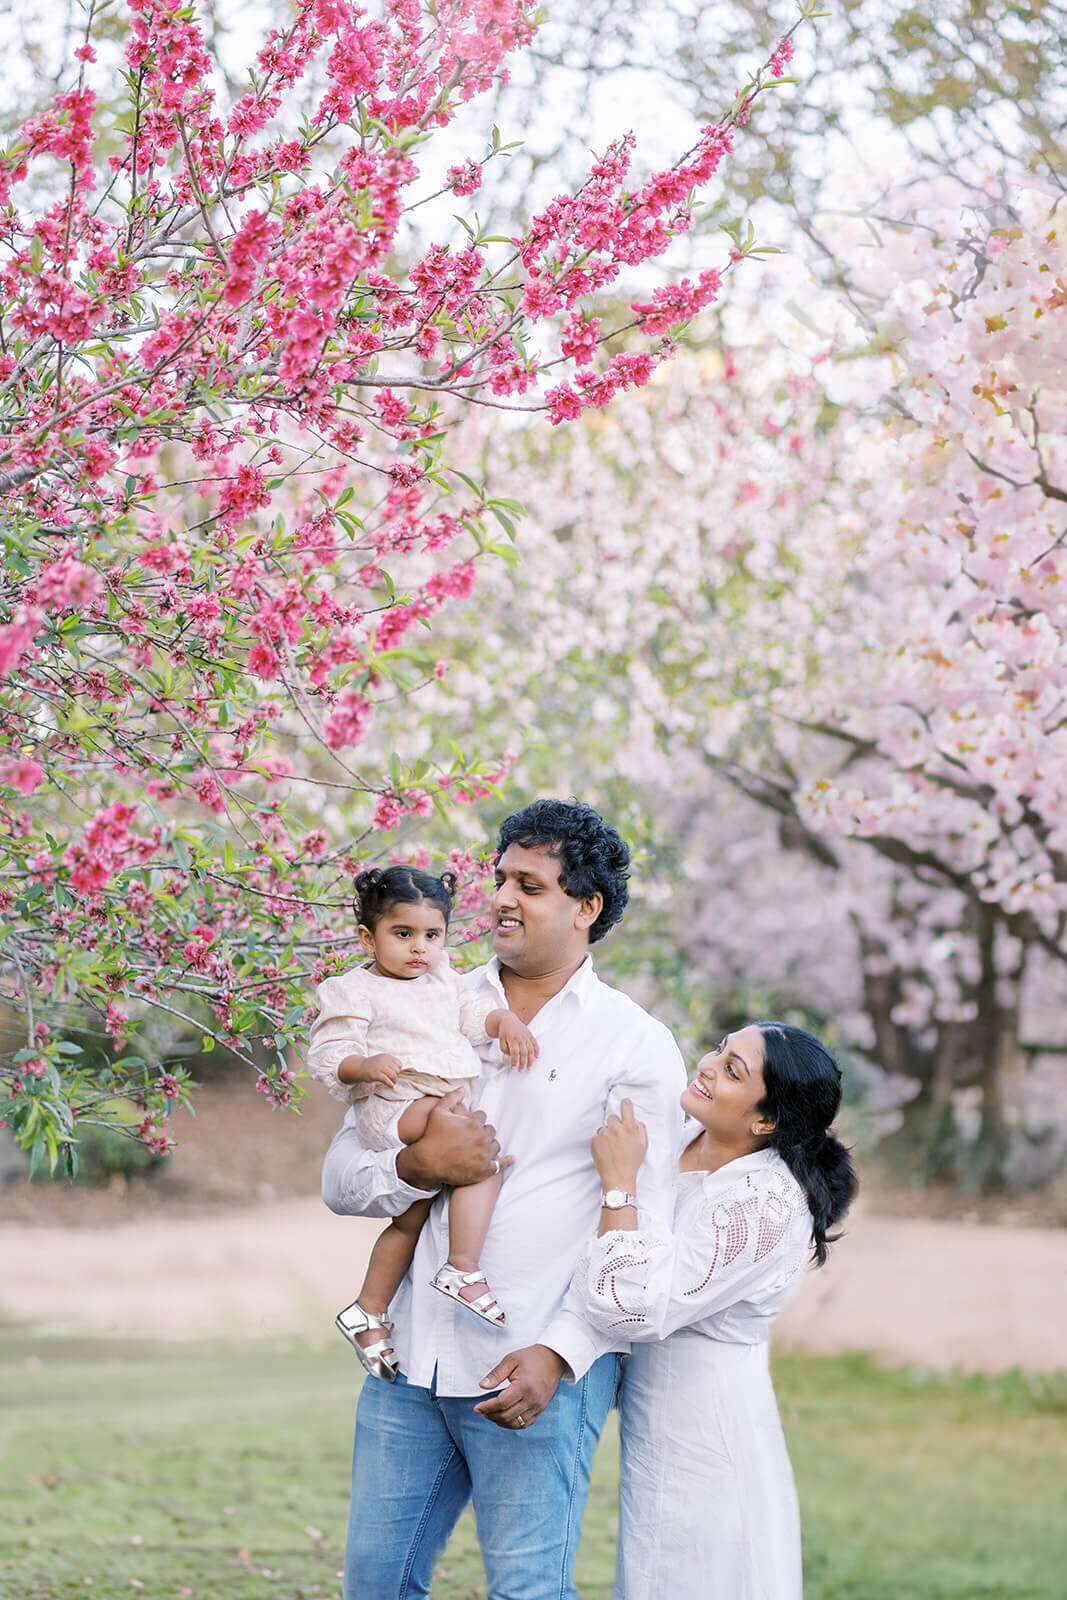 Amongst cherry blossoms, we mark our family's joy for baby's first year